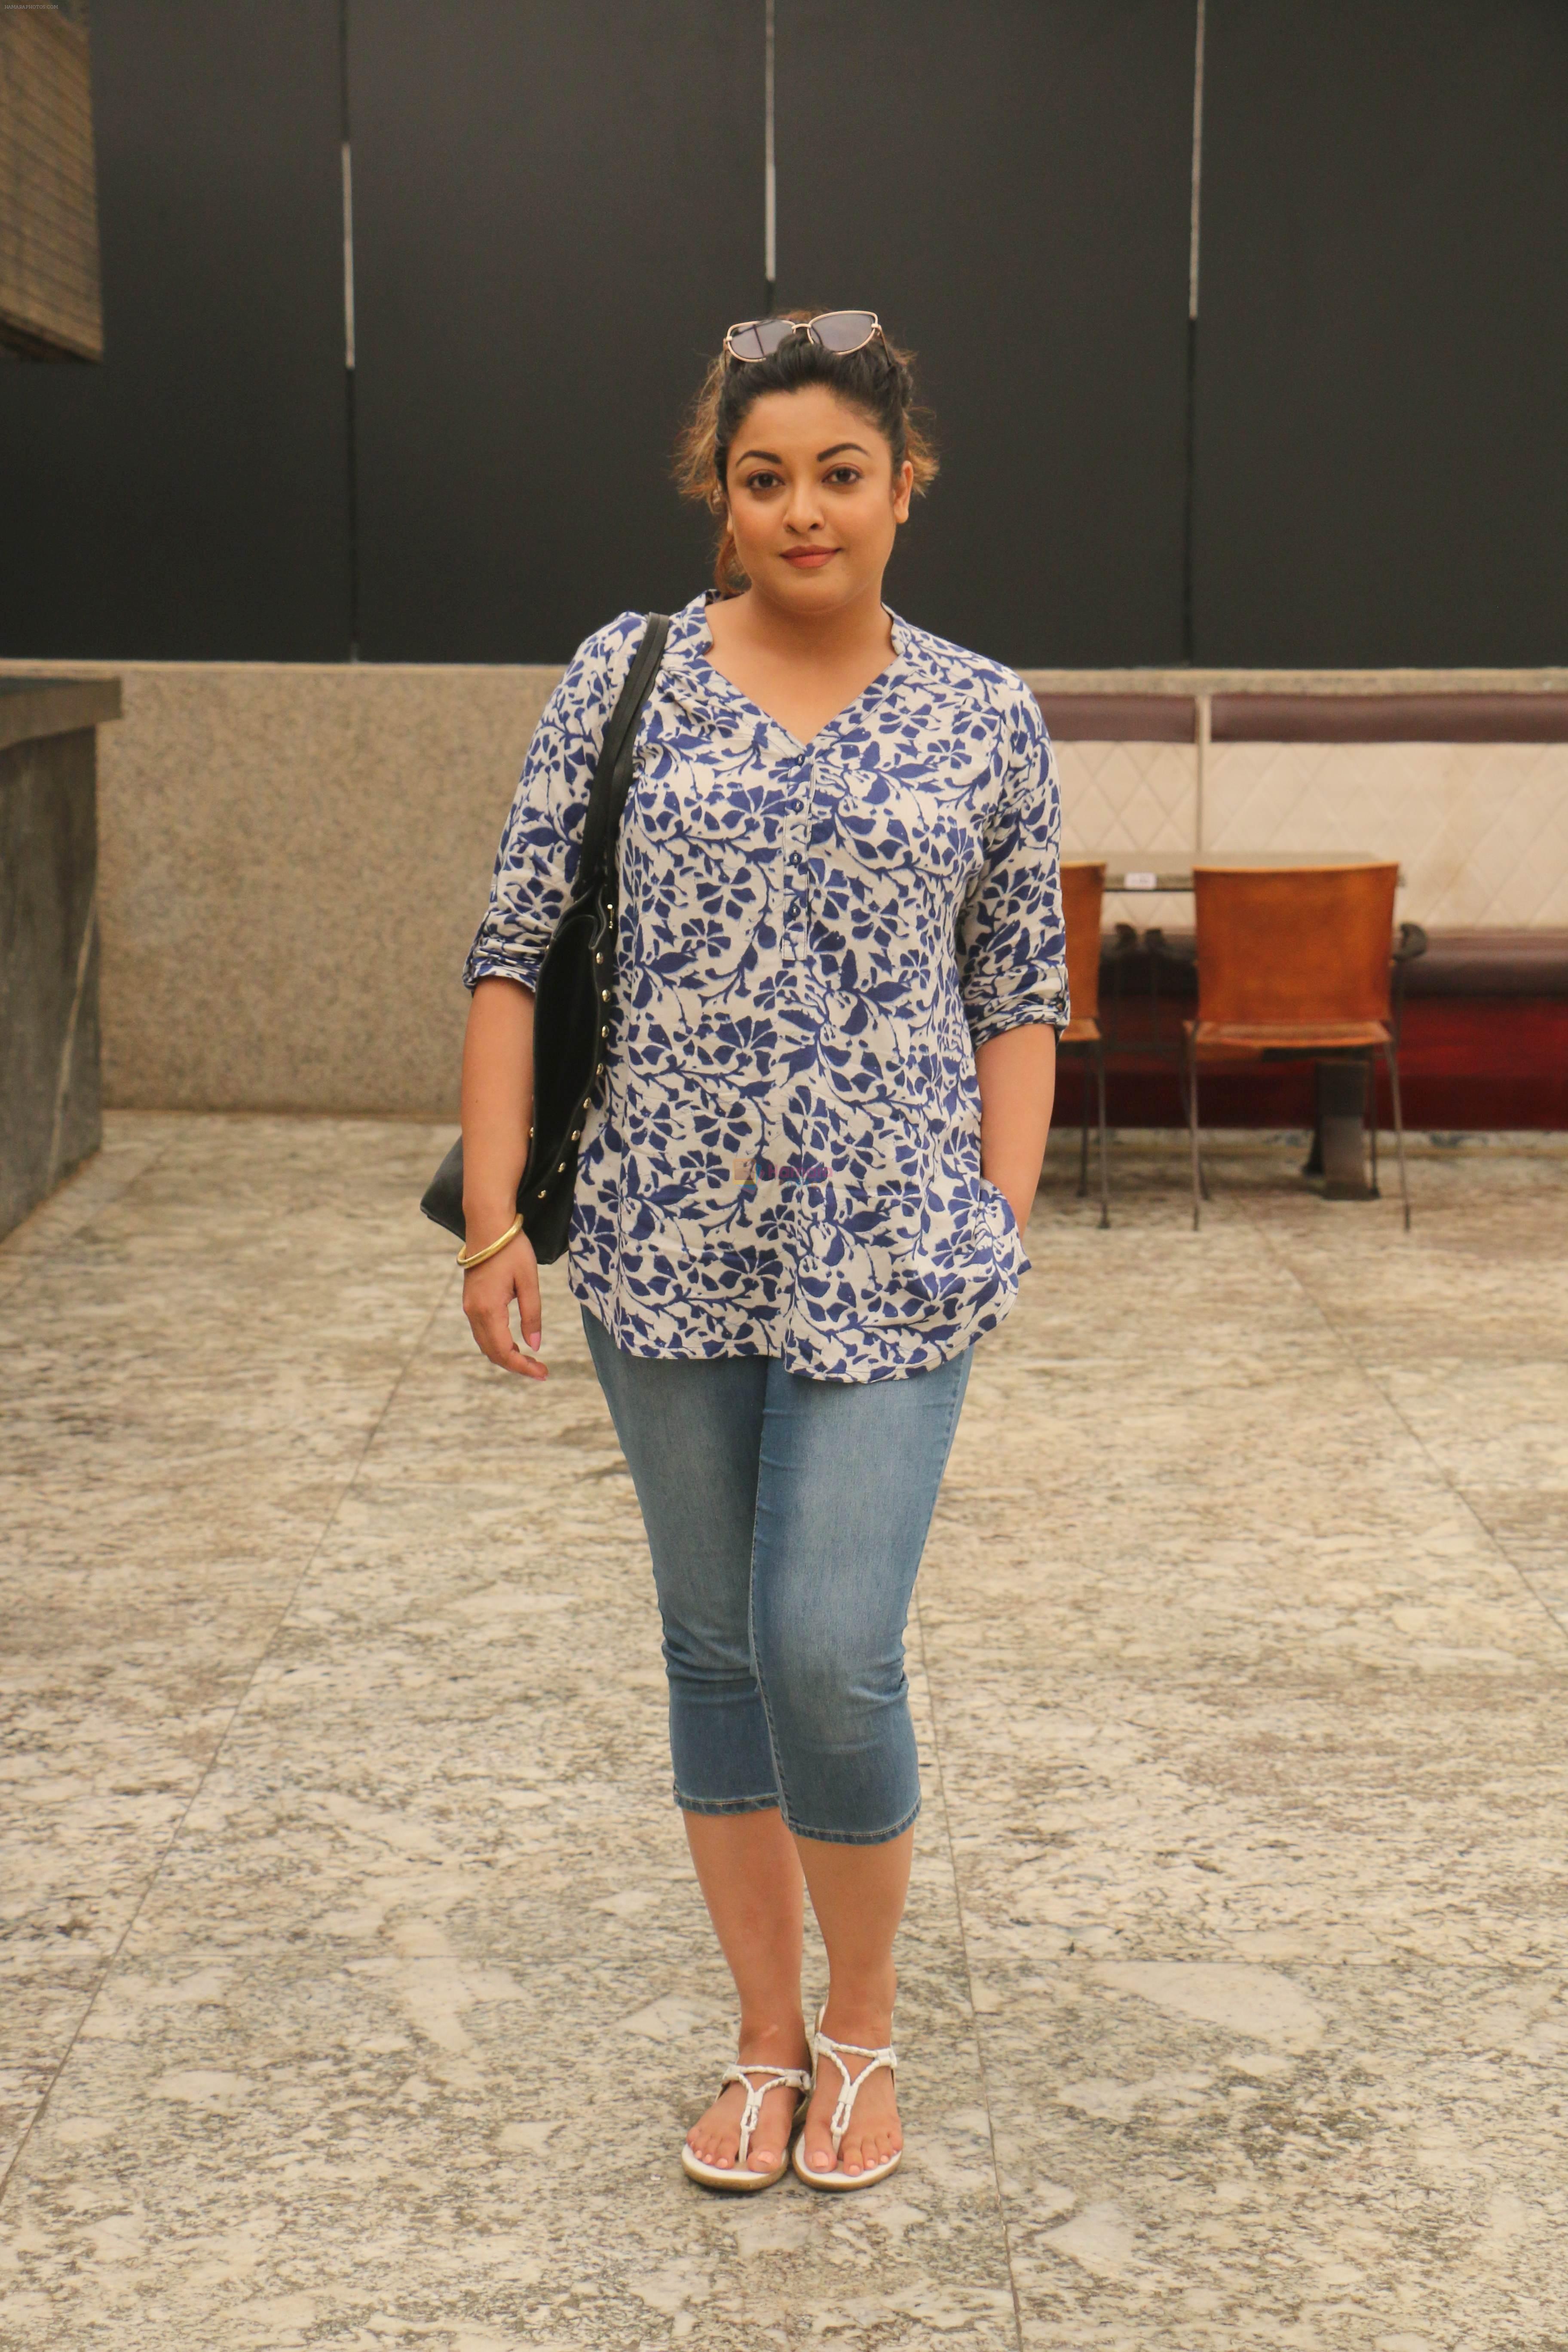 Tanushree Dutta inteacts with media for the M2 campaign at juhu on 27th Sept 2018